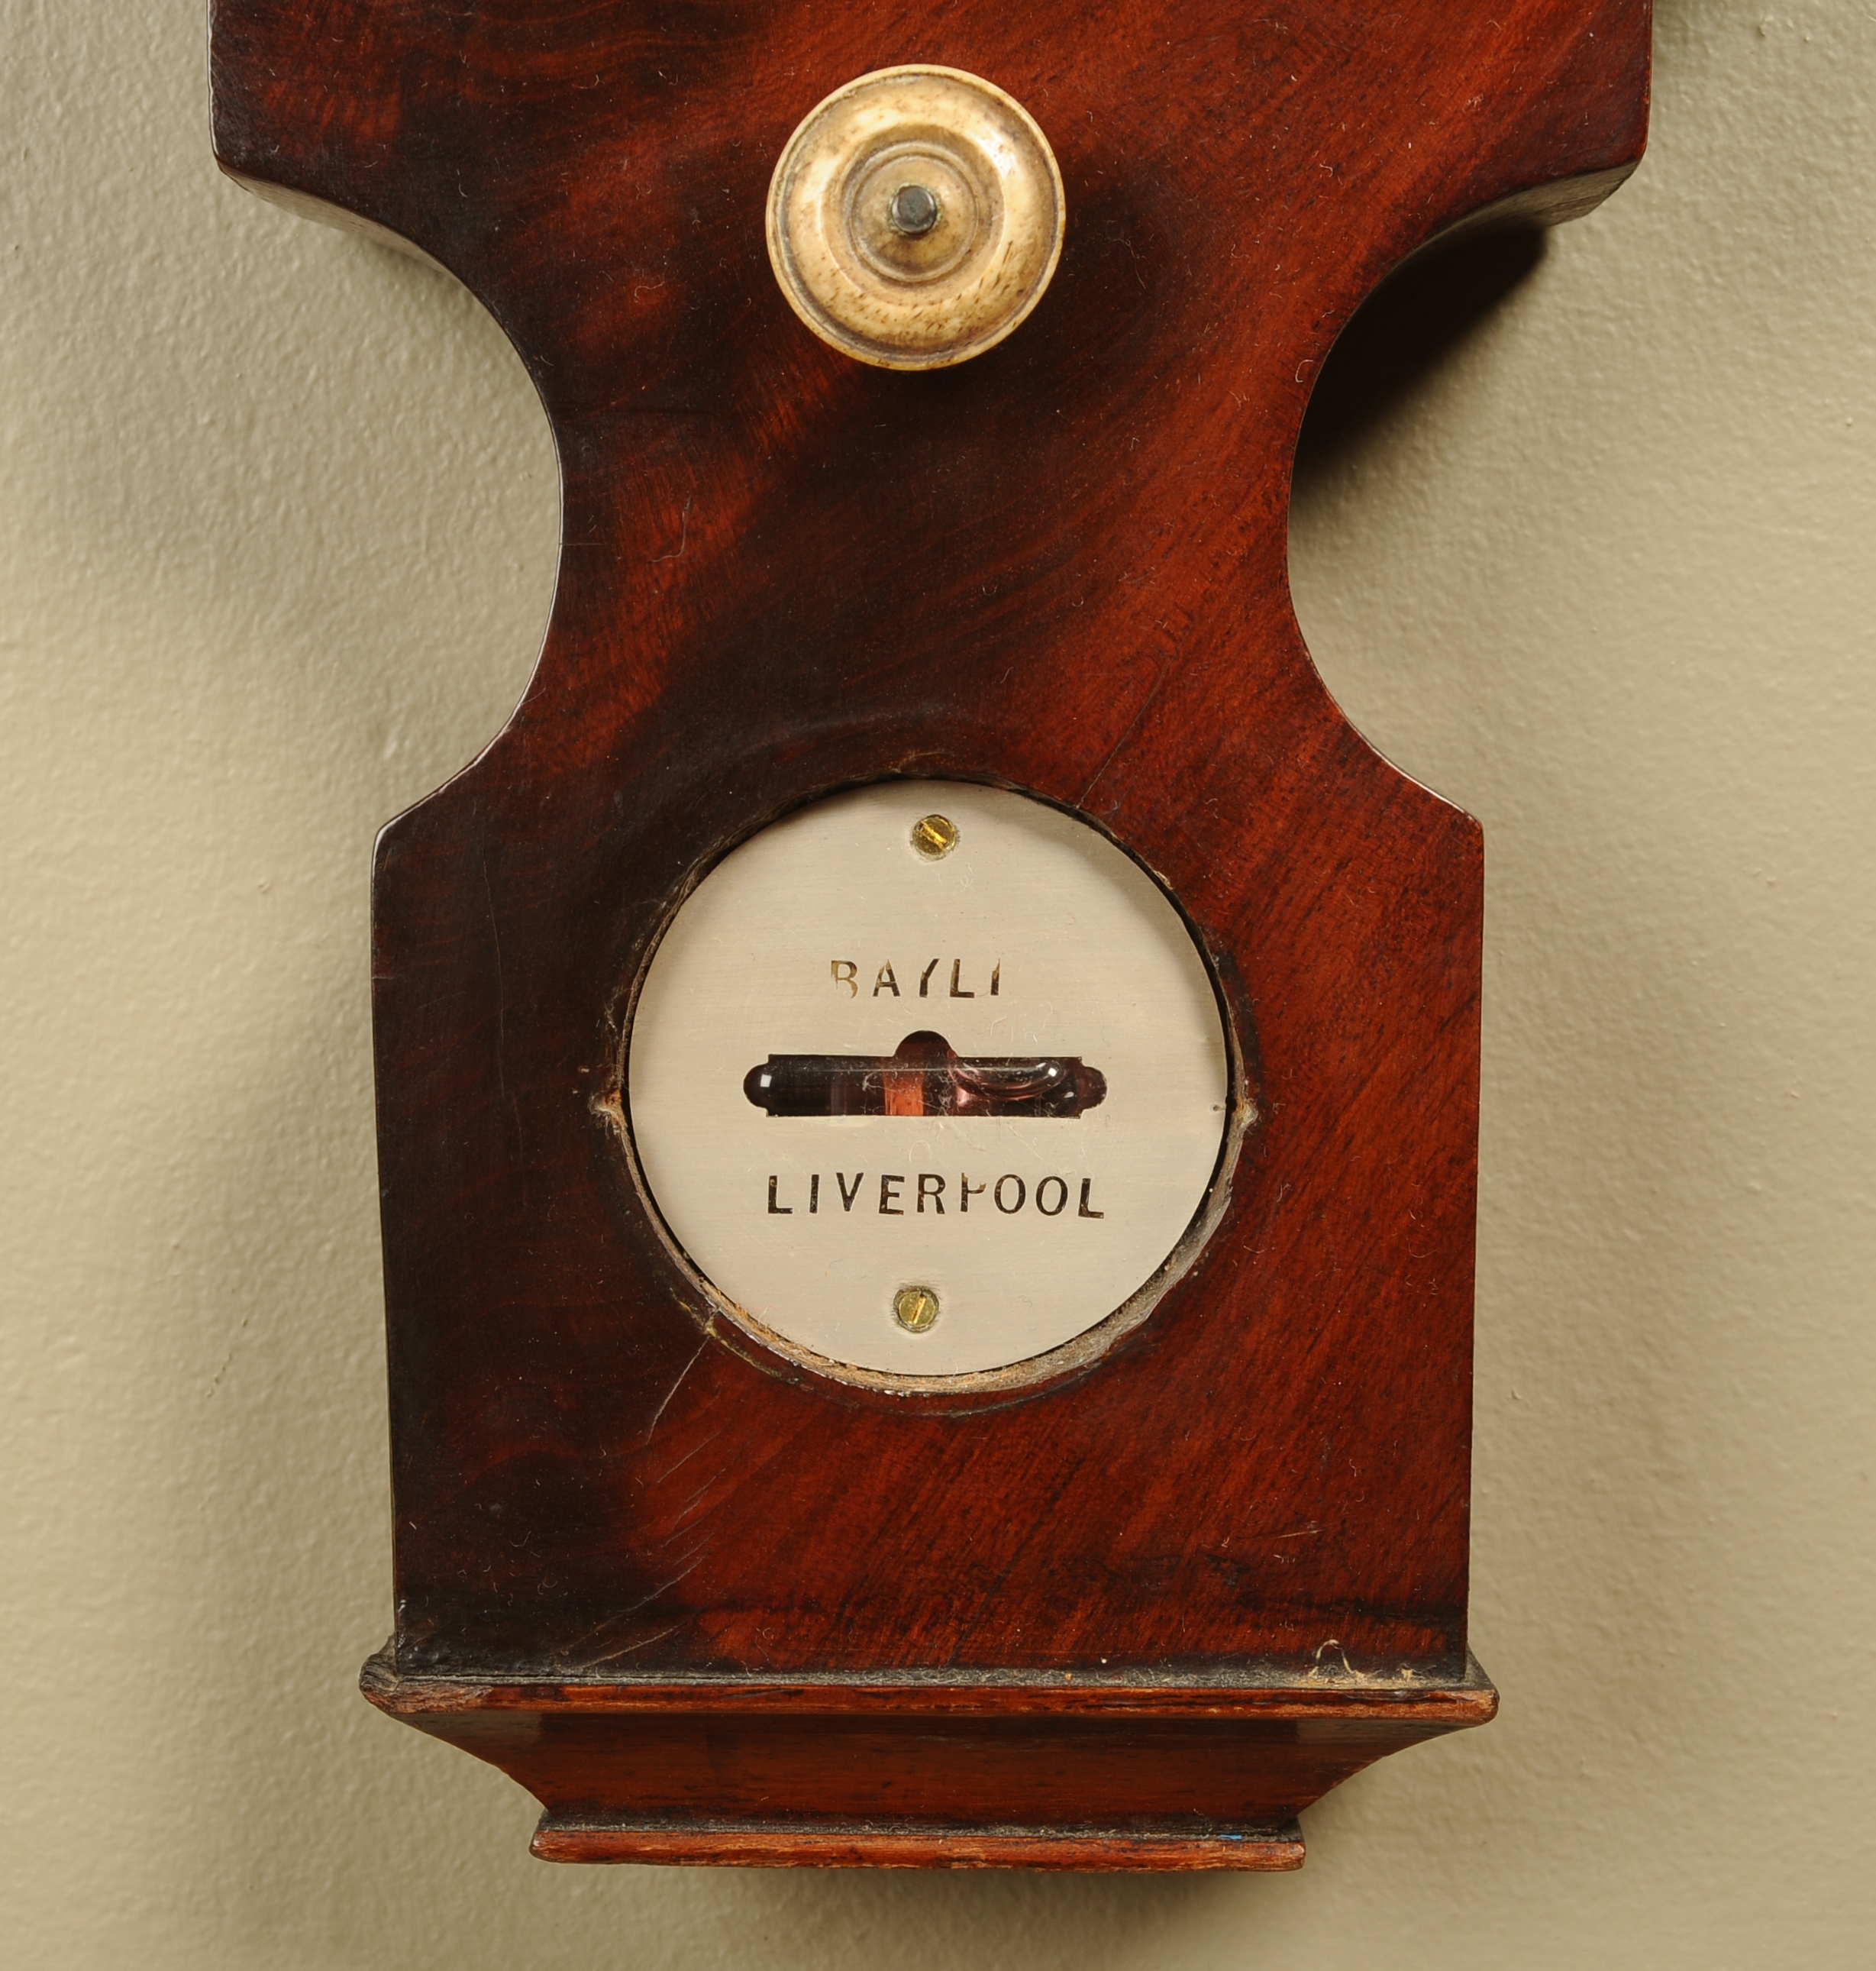 A MAHOGANY BANJO BAROMETER-THERMOMETER by Bayli of Liverpool, having a silvered dial, thermometer,